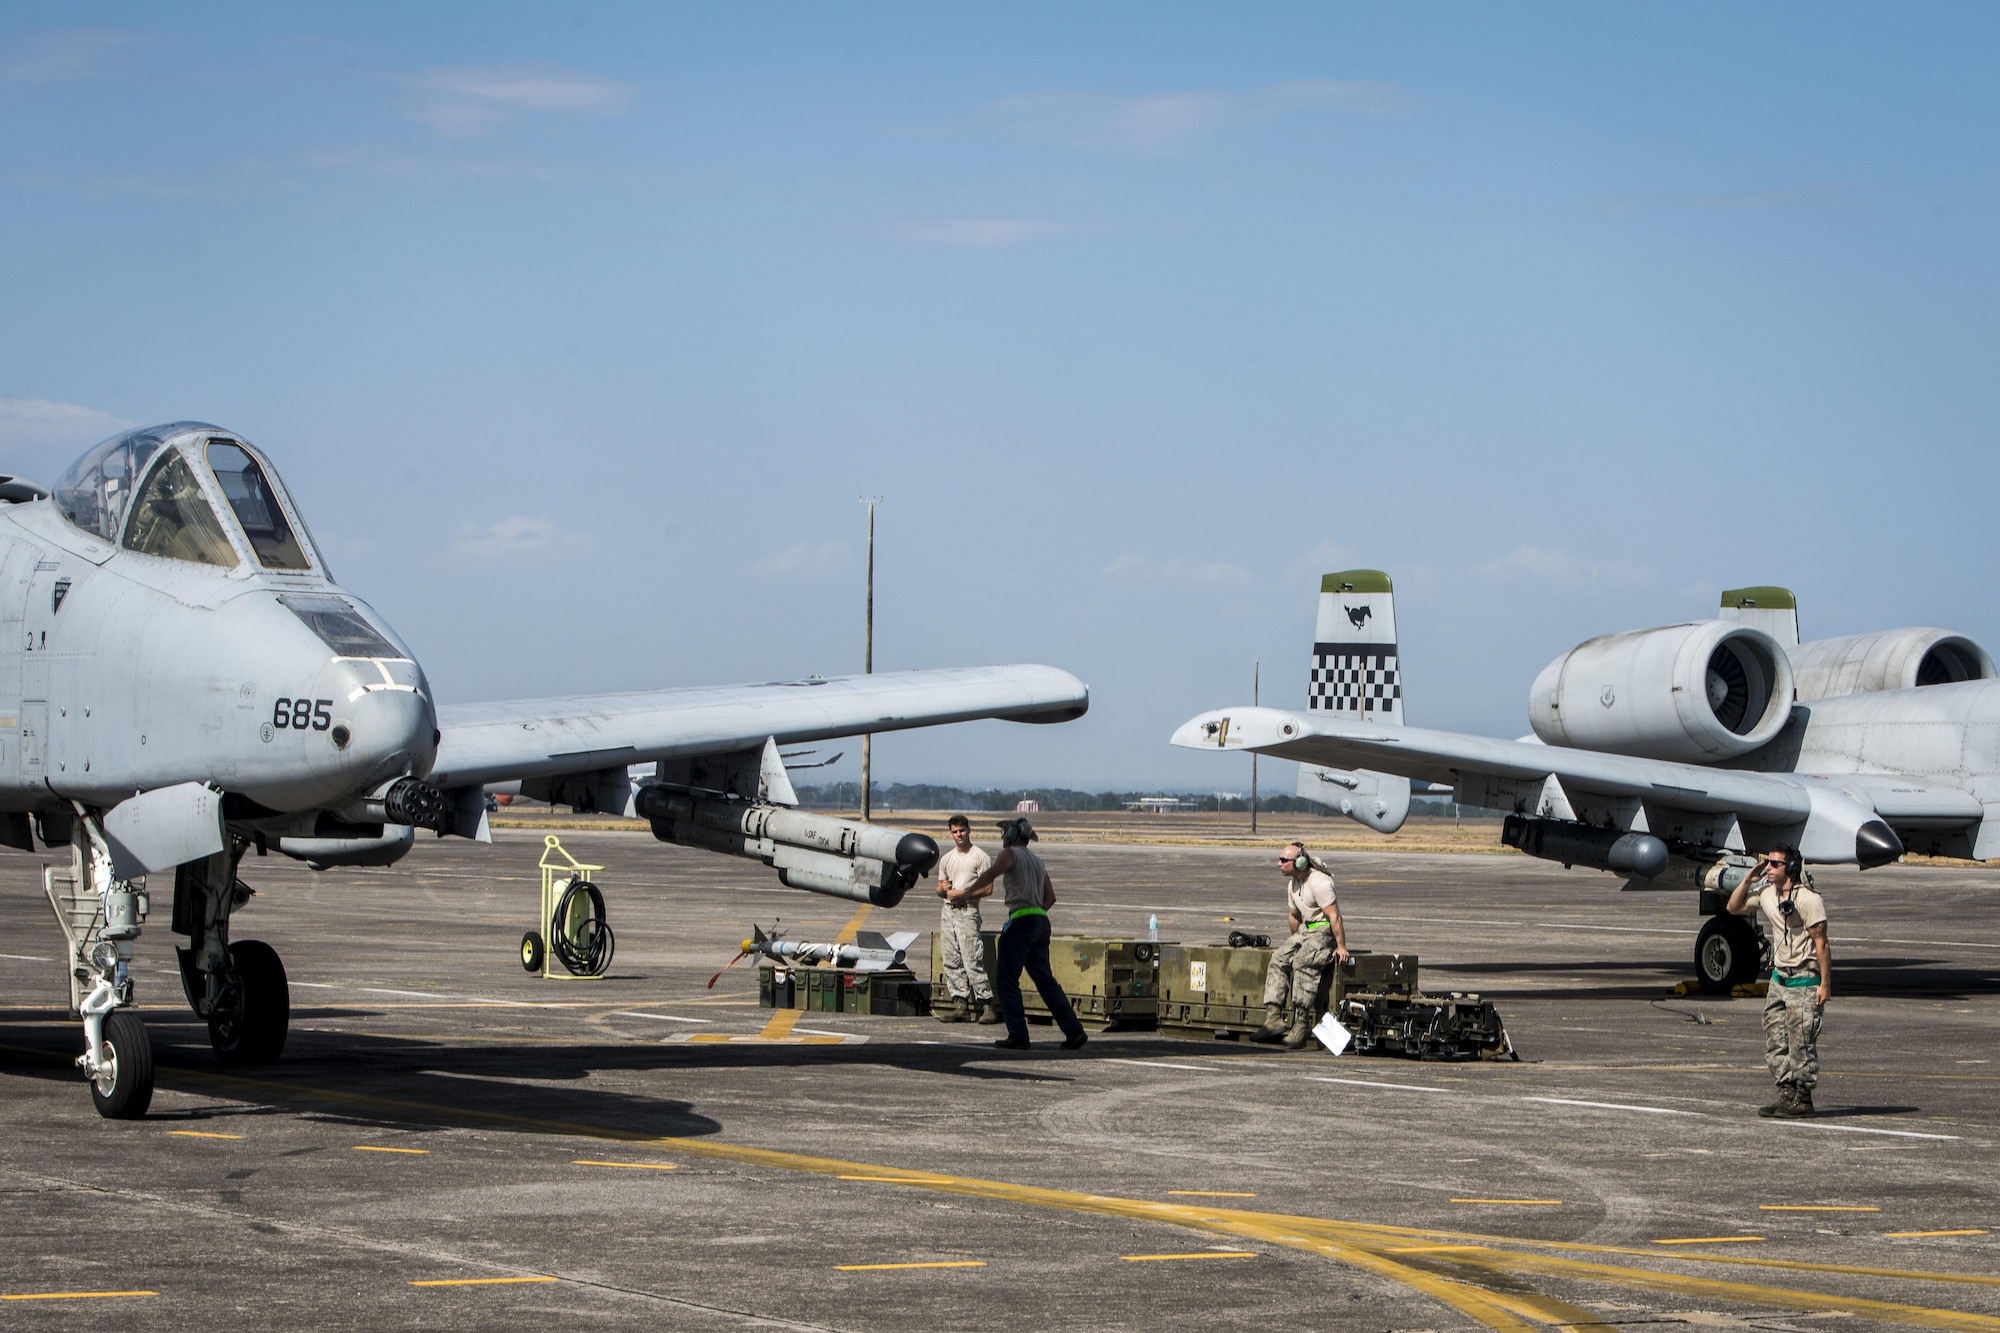 U.S. Air Force Senior Airman Daniel Mobili, a dedicated crew chief with the 51st Fighter Wing, Osan Air Base, Republic of Korea, salutes the pilot an A-10C Thunderbolt II after marshalling the aircraft for take off at Clark Air Base, Philippines, April 19, 2016. Maintenance Airmen play a critical role in the newly stood up Air Contingent’s ongoing operations ranging from air and maritime domain awareness, personnel recovery, combating piracy, and assurance all nations have access to the regional air and maritime domains in accordance with international law. Mobili is a Miami, Florida, native. (U.S. Air Force photo by Staff Sgt. Benjamin W. Stratton)